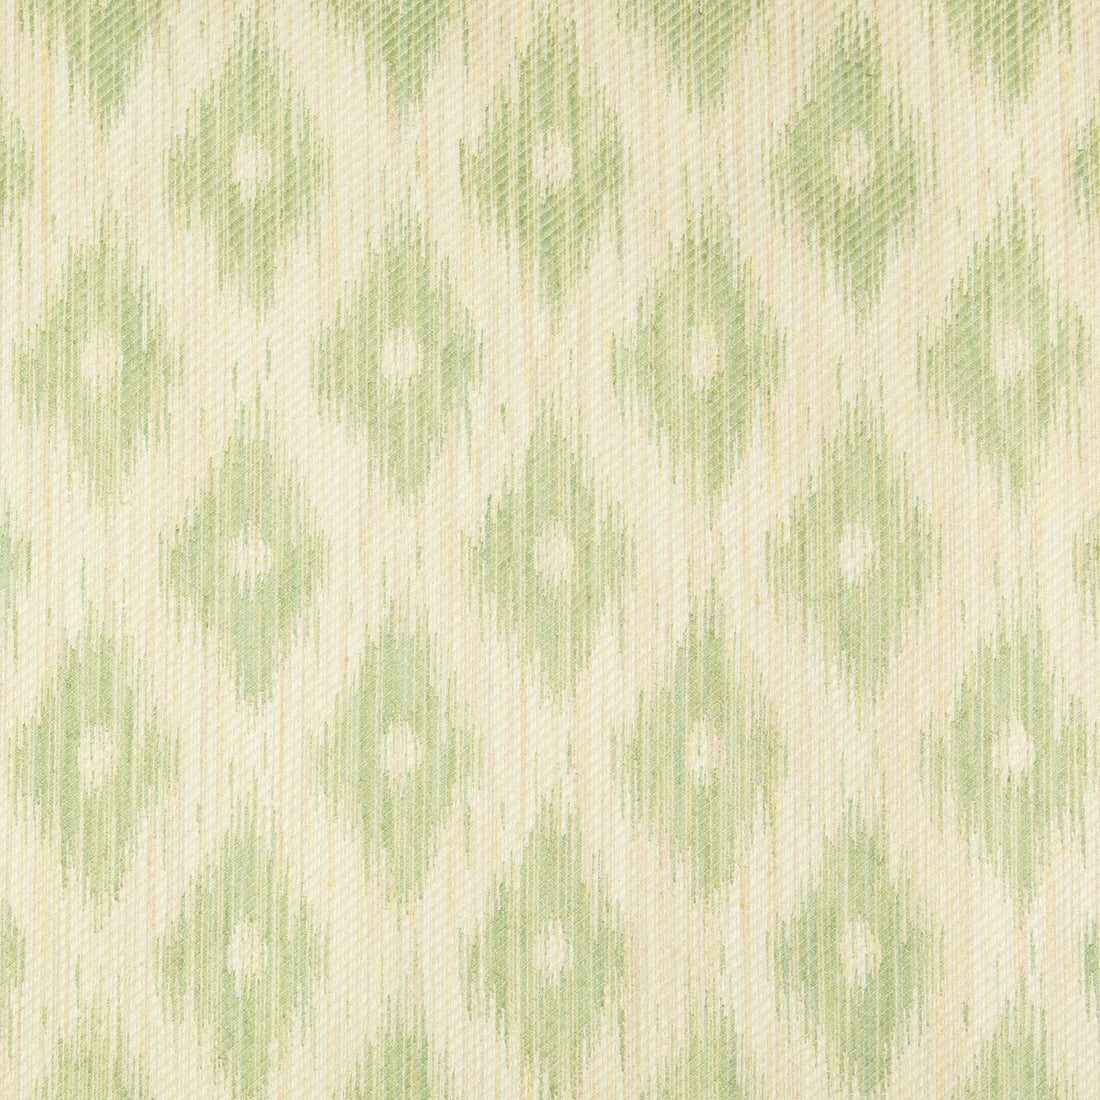 Viceroy Strie II fabric in celery color - pattern 8017139.3.0 - by Brunschwig &amp; Fils in the Baronet collection